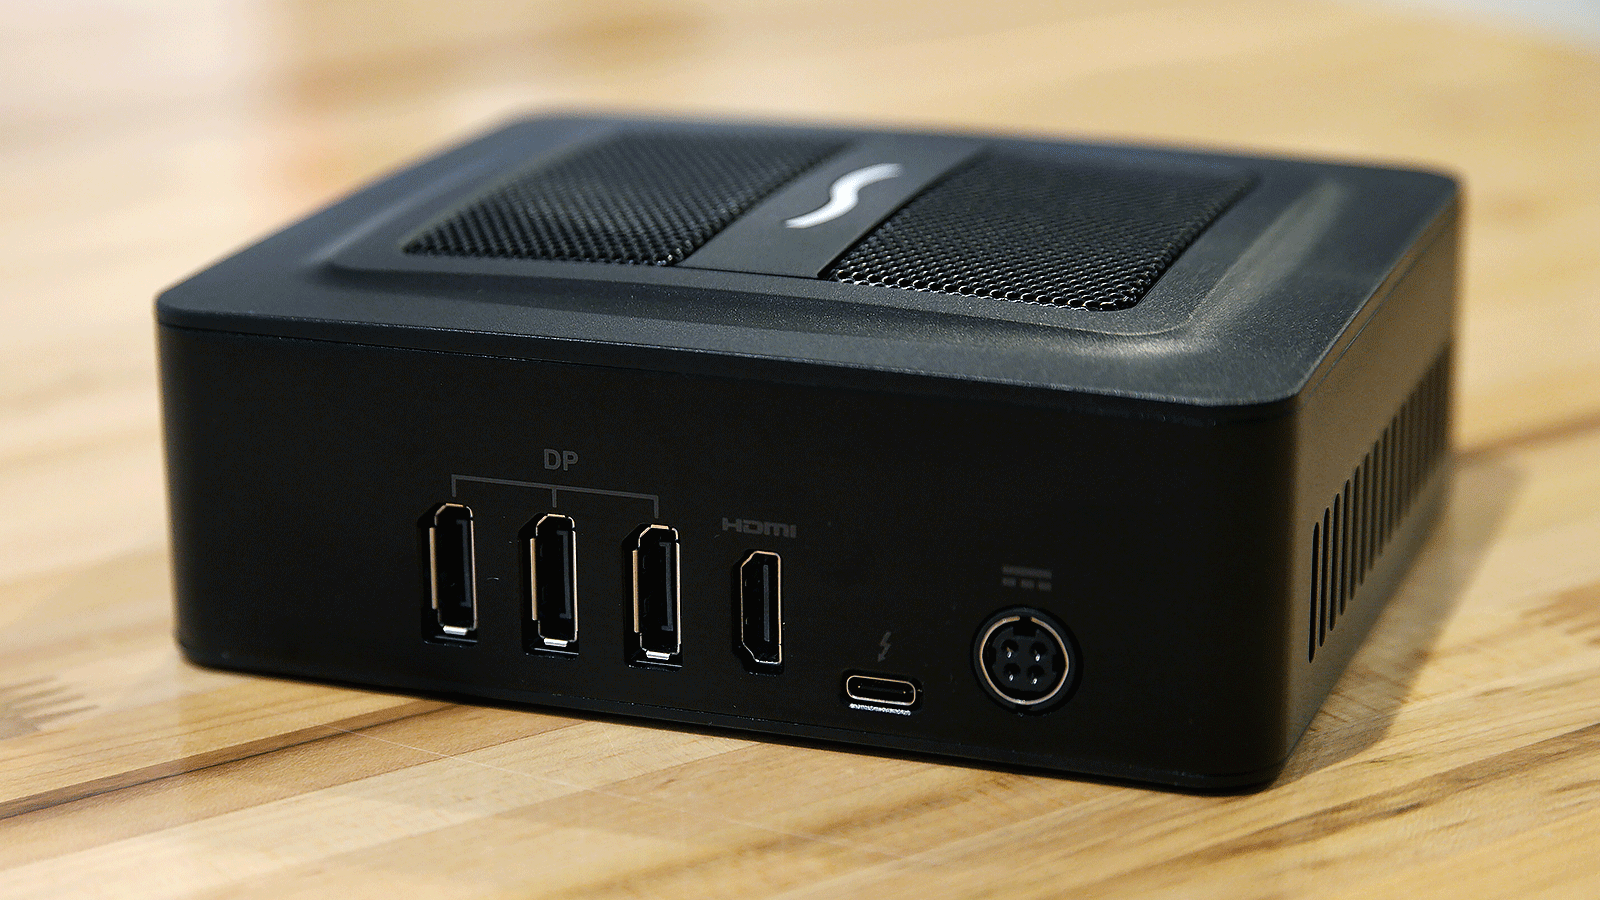 This Little Box Can Make Even The Junkiest Laptop A Gaming PC